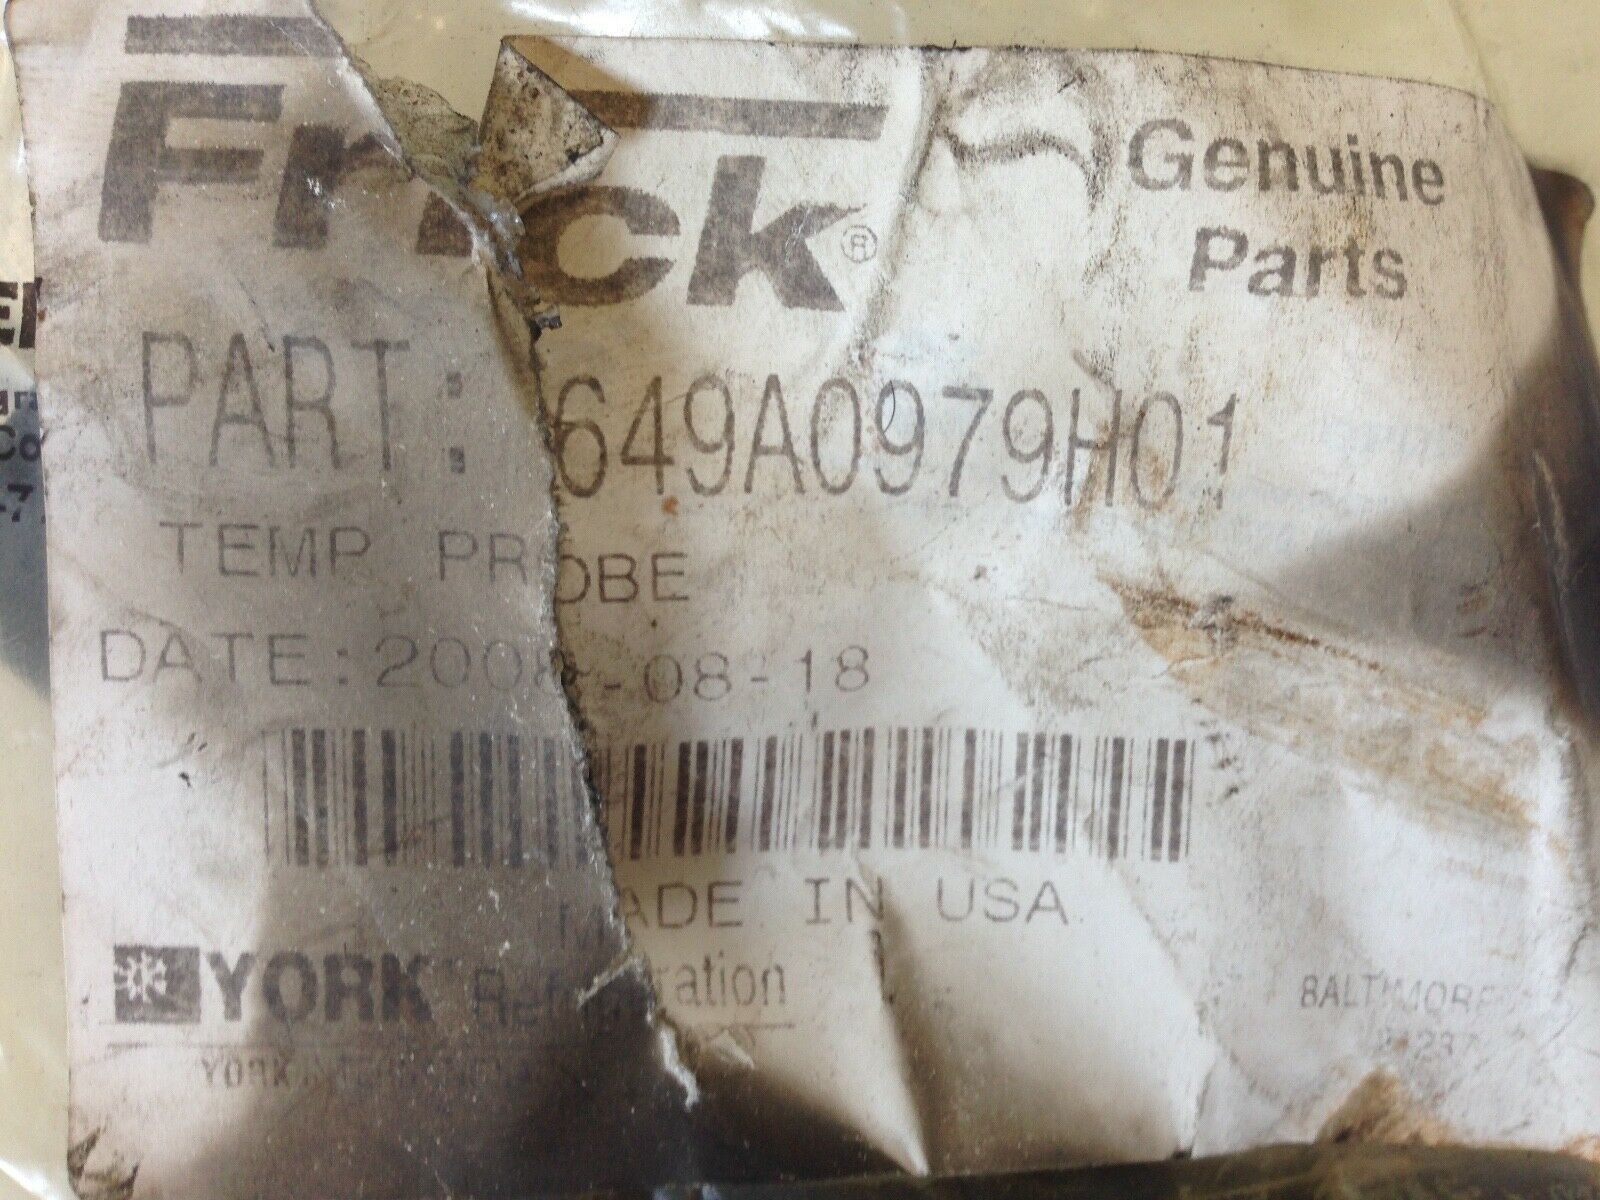 649A0979G01 Frick Temperature Probe Replacement Kit